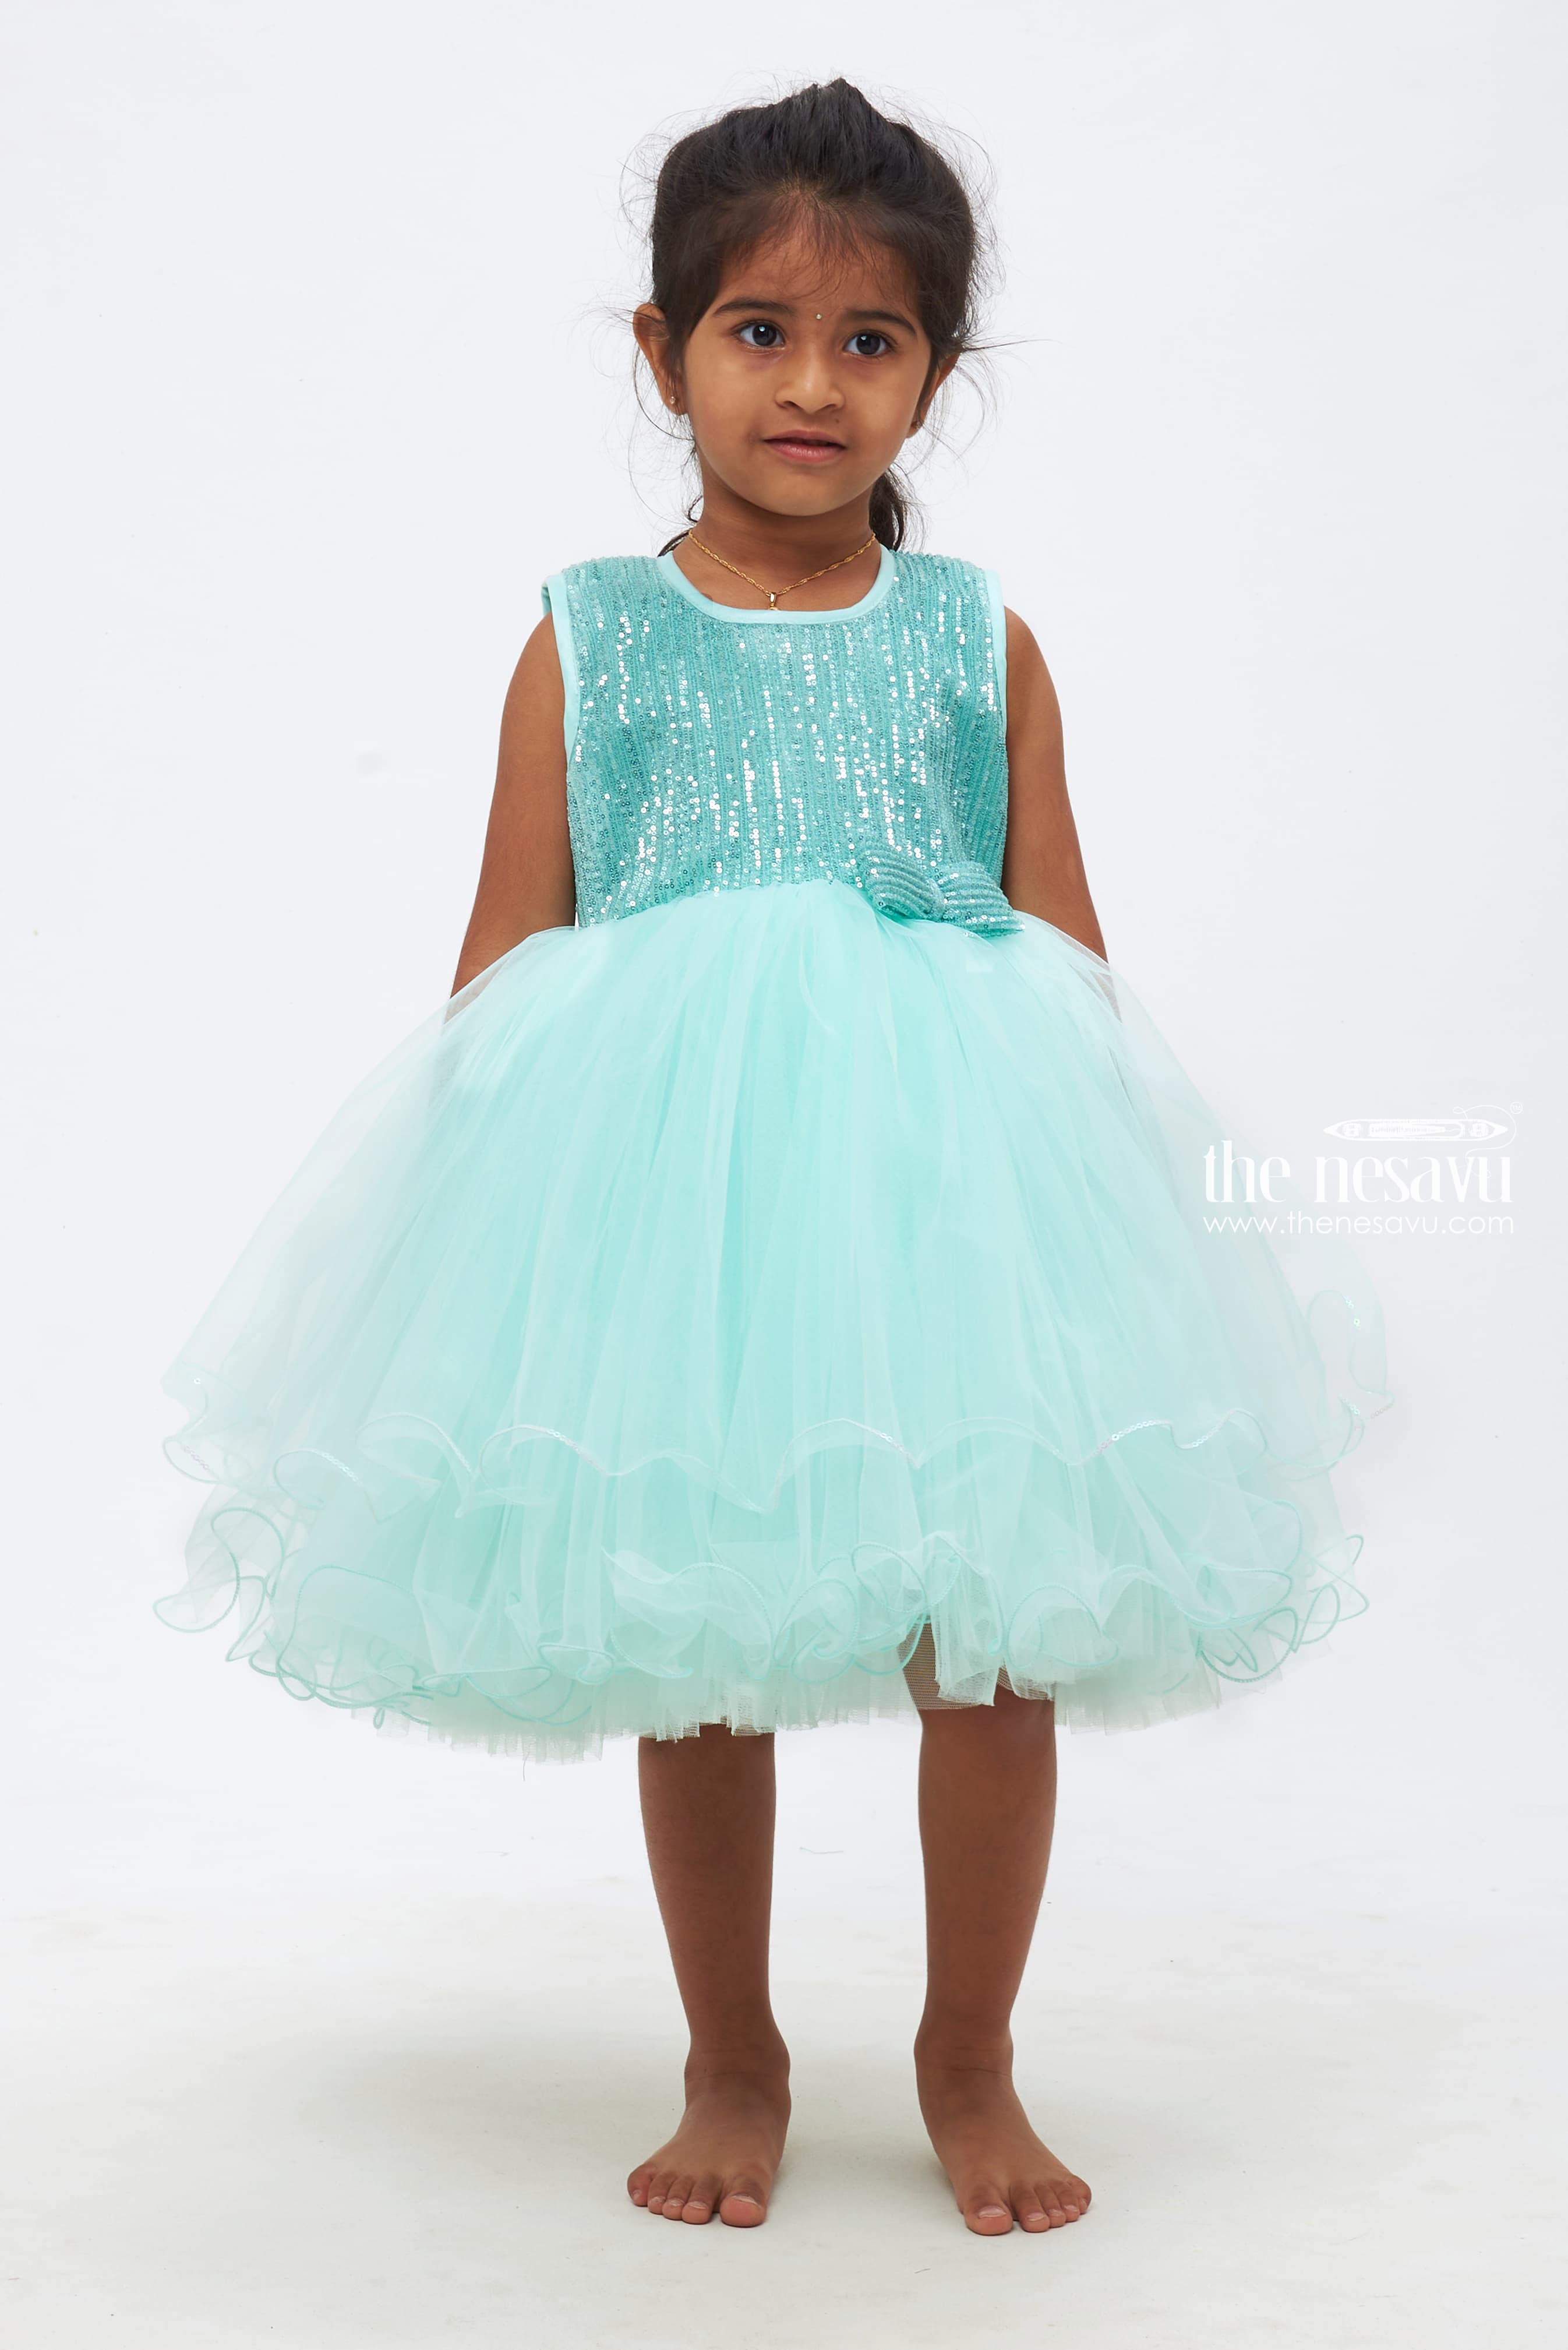 Ripening Baby-Girl's Sequin/Net Infant Birthday Wedding Kids Dresses  Princess Gown_3-4Years : Amazon.in: Fashion